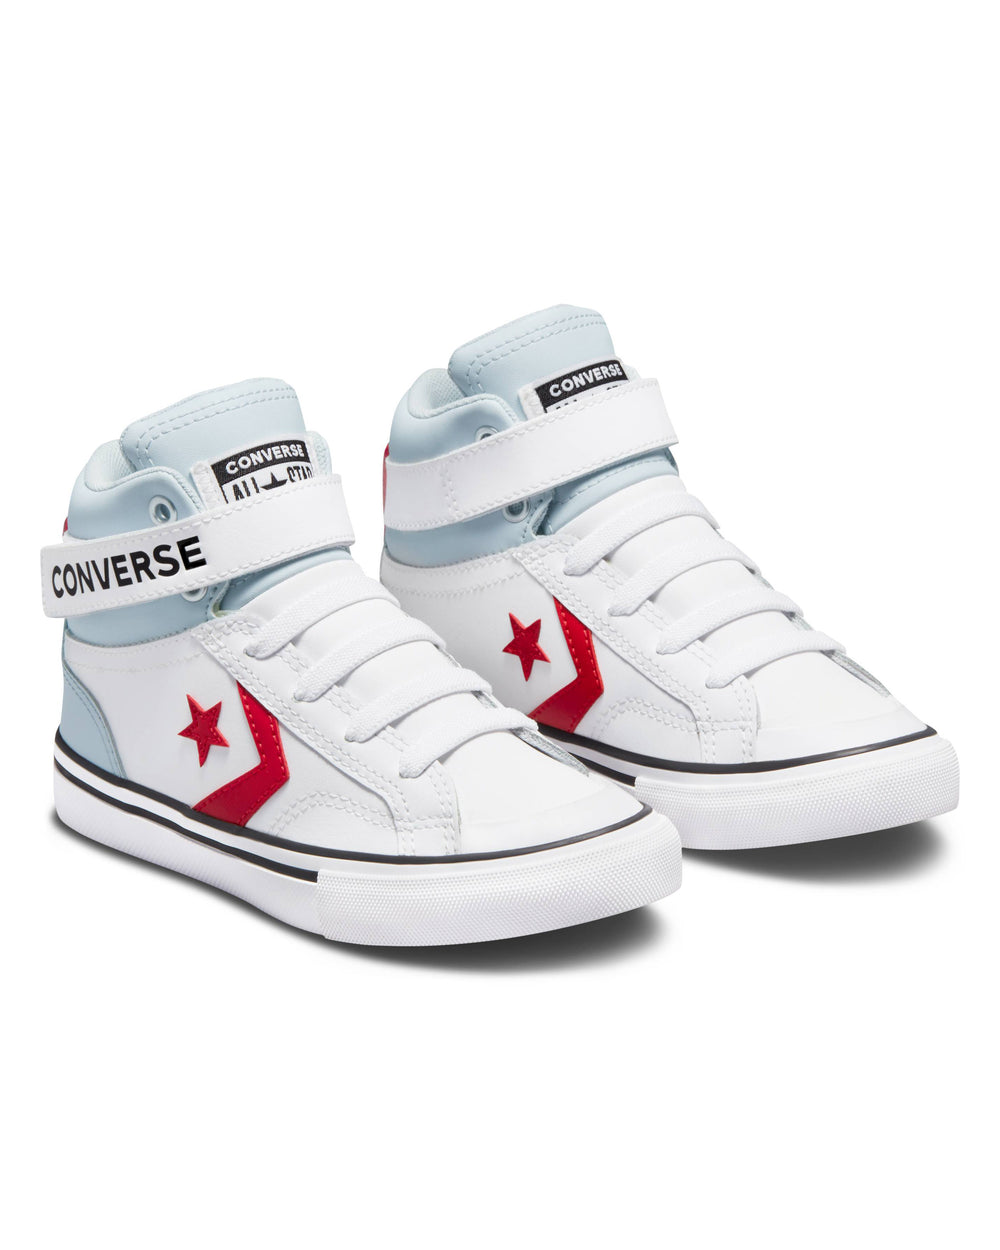 Converse Chuck Taylor All Star Infant & Kid Pro Blaze Retro Sport Hi - White/Ghosted/Red